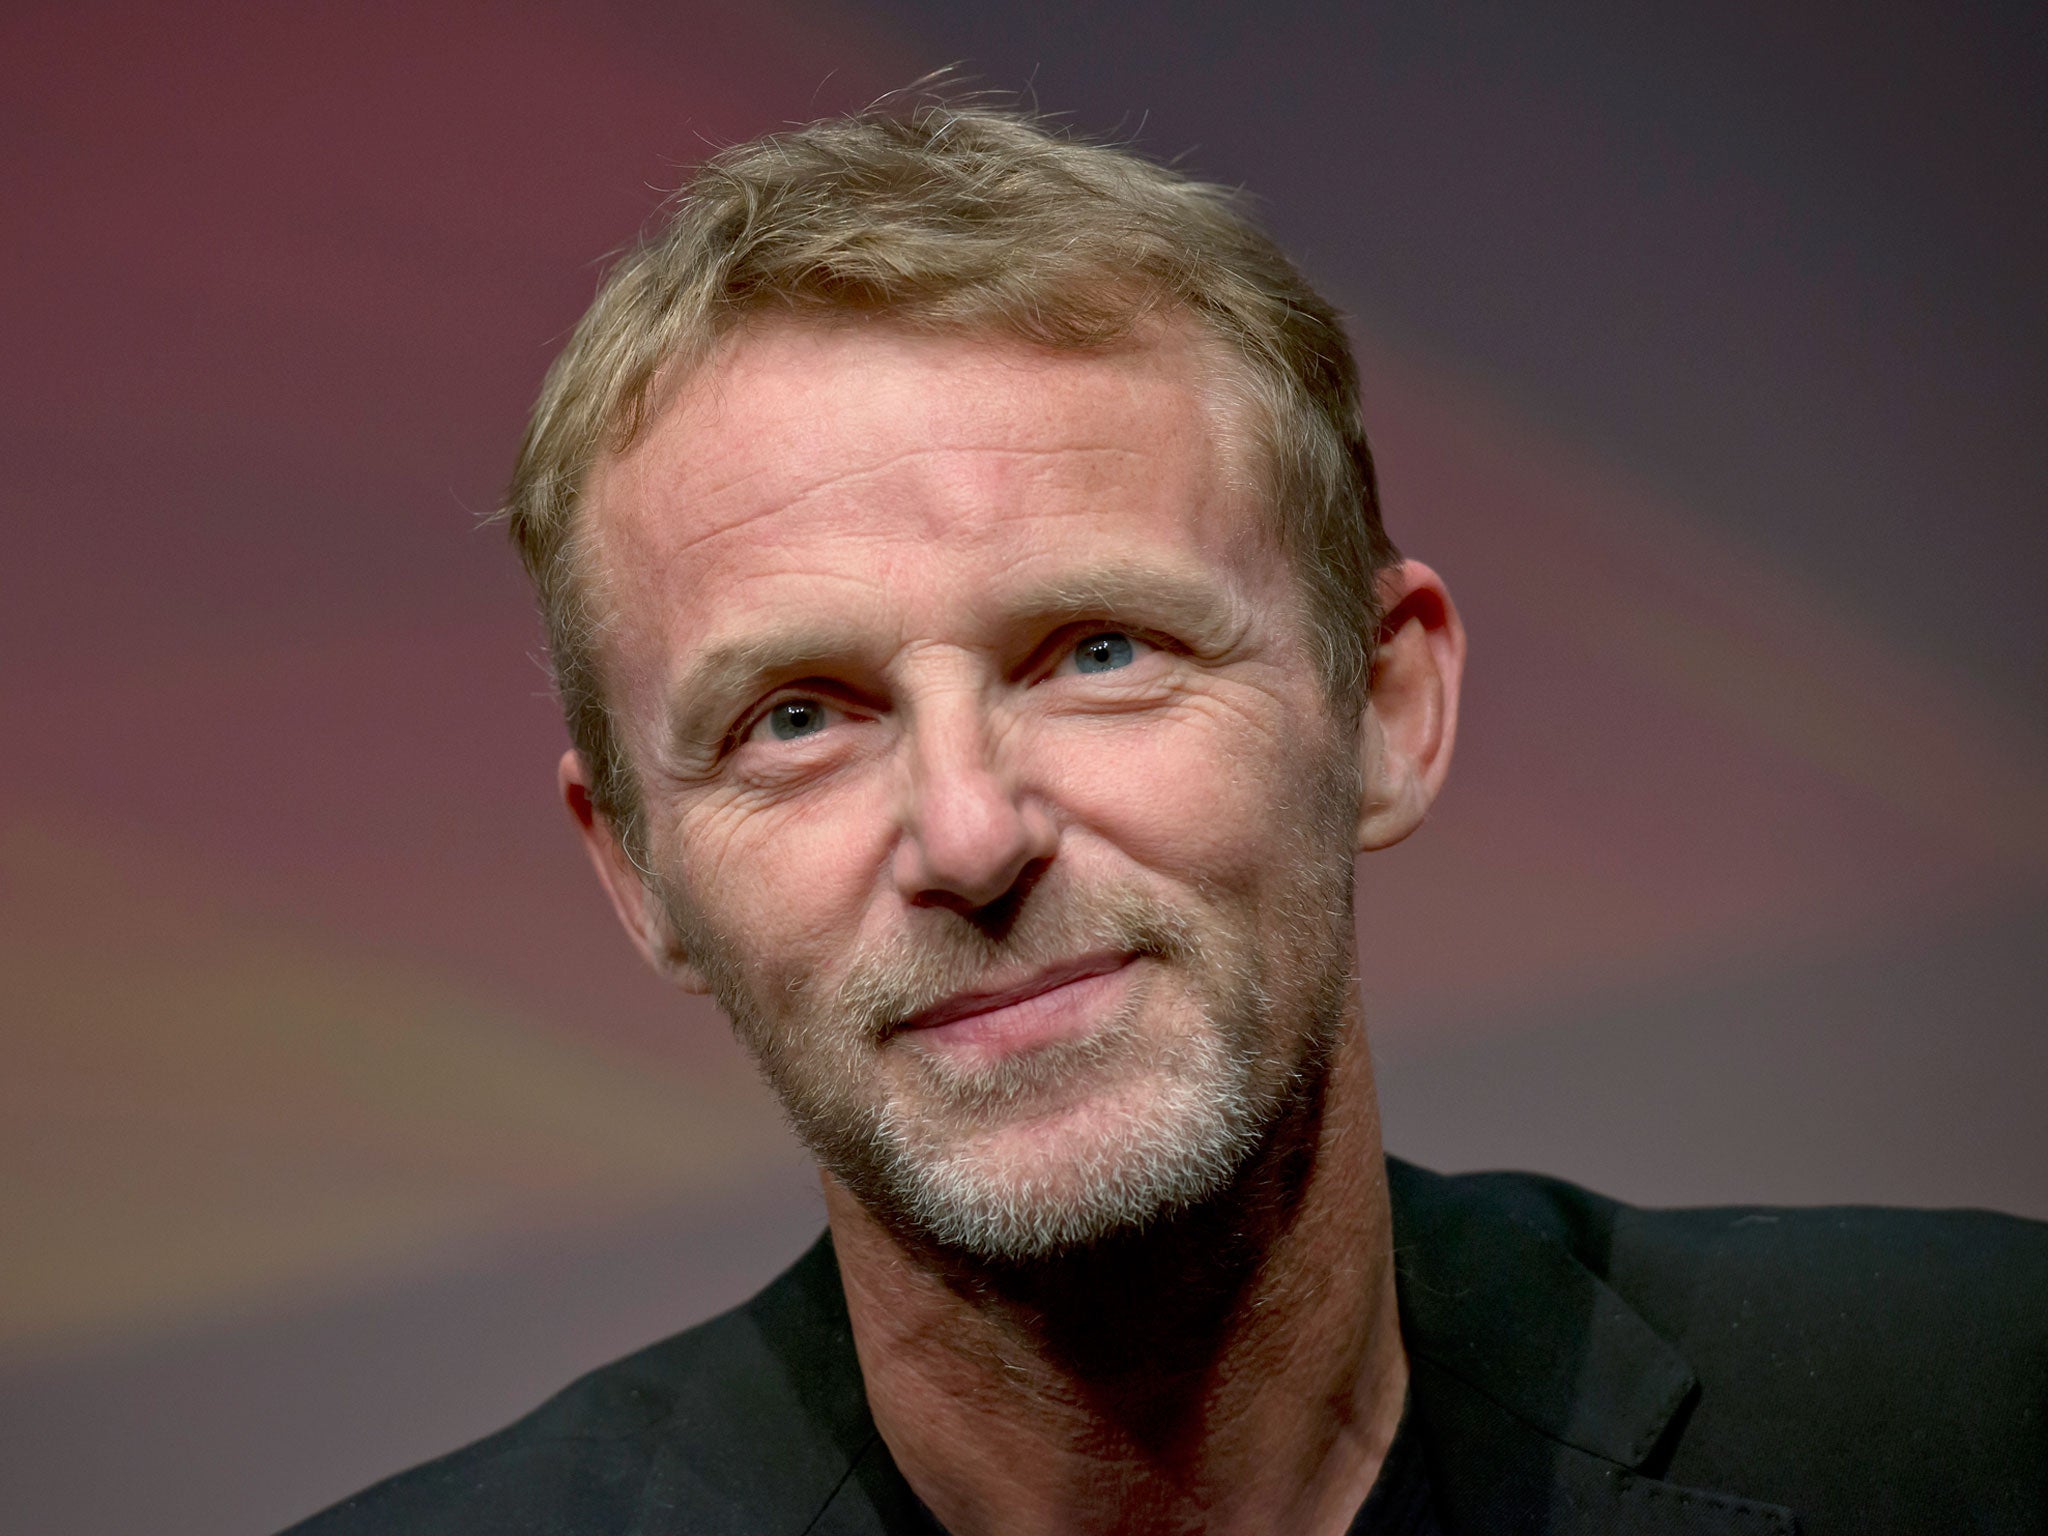 Bestselling writer: Jo Nesbo said he wanted to move on from his Harry Hole thrillers